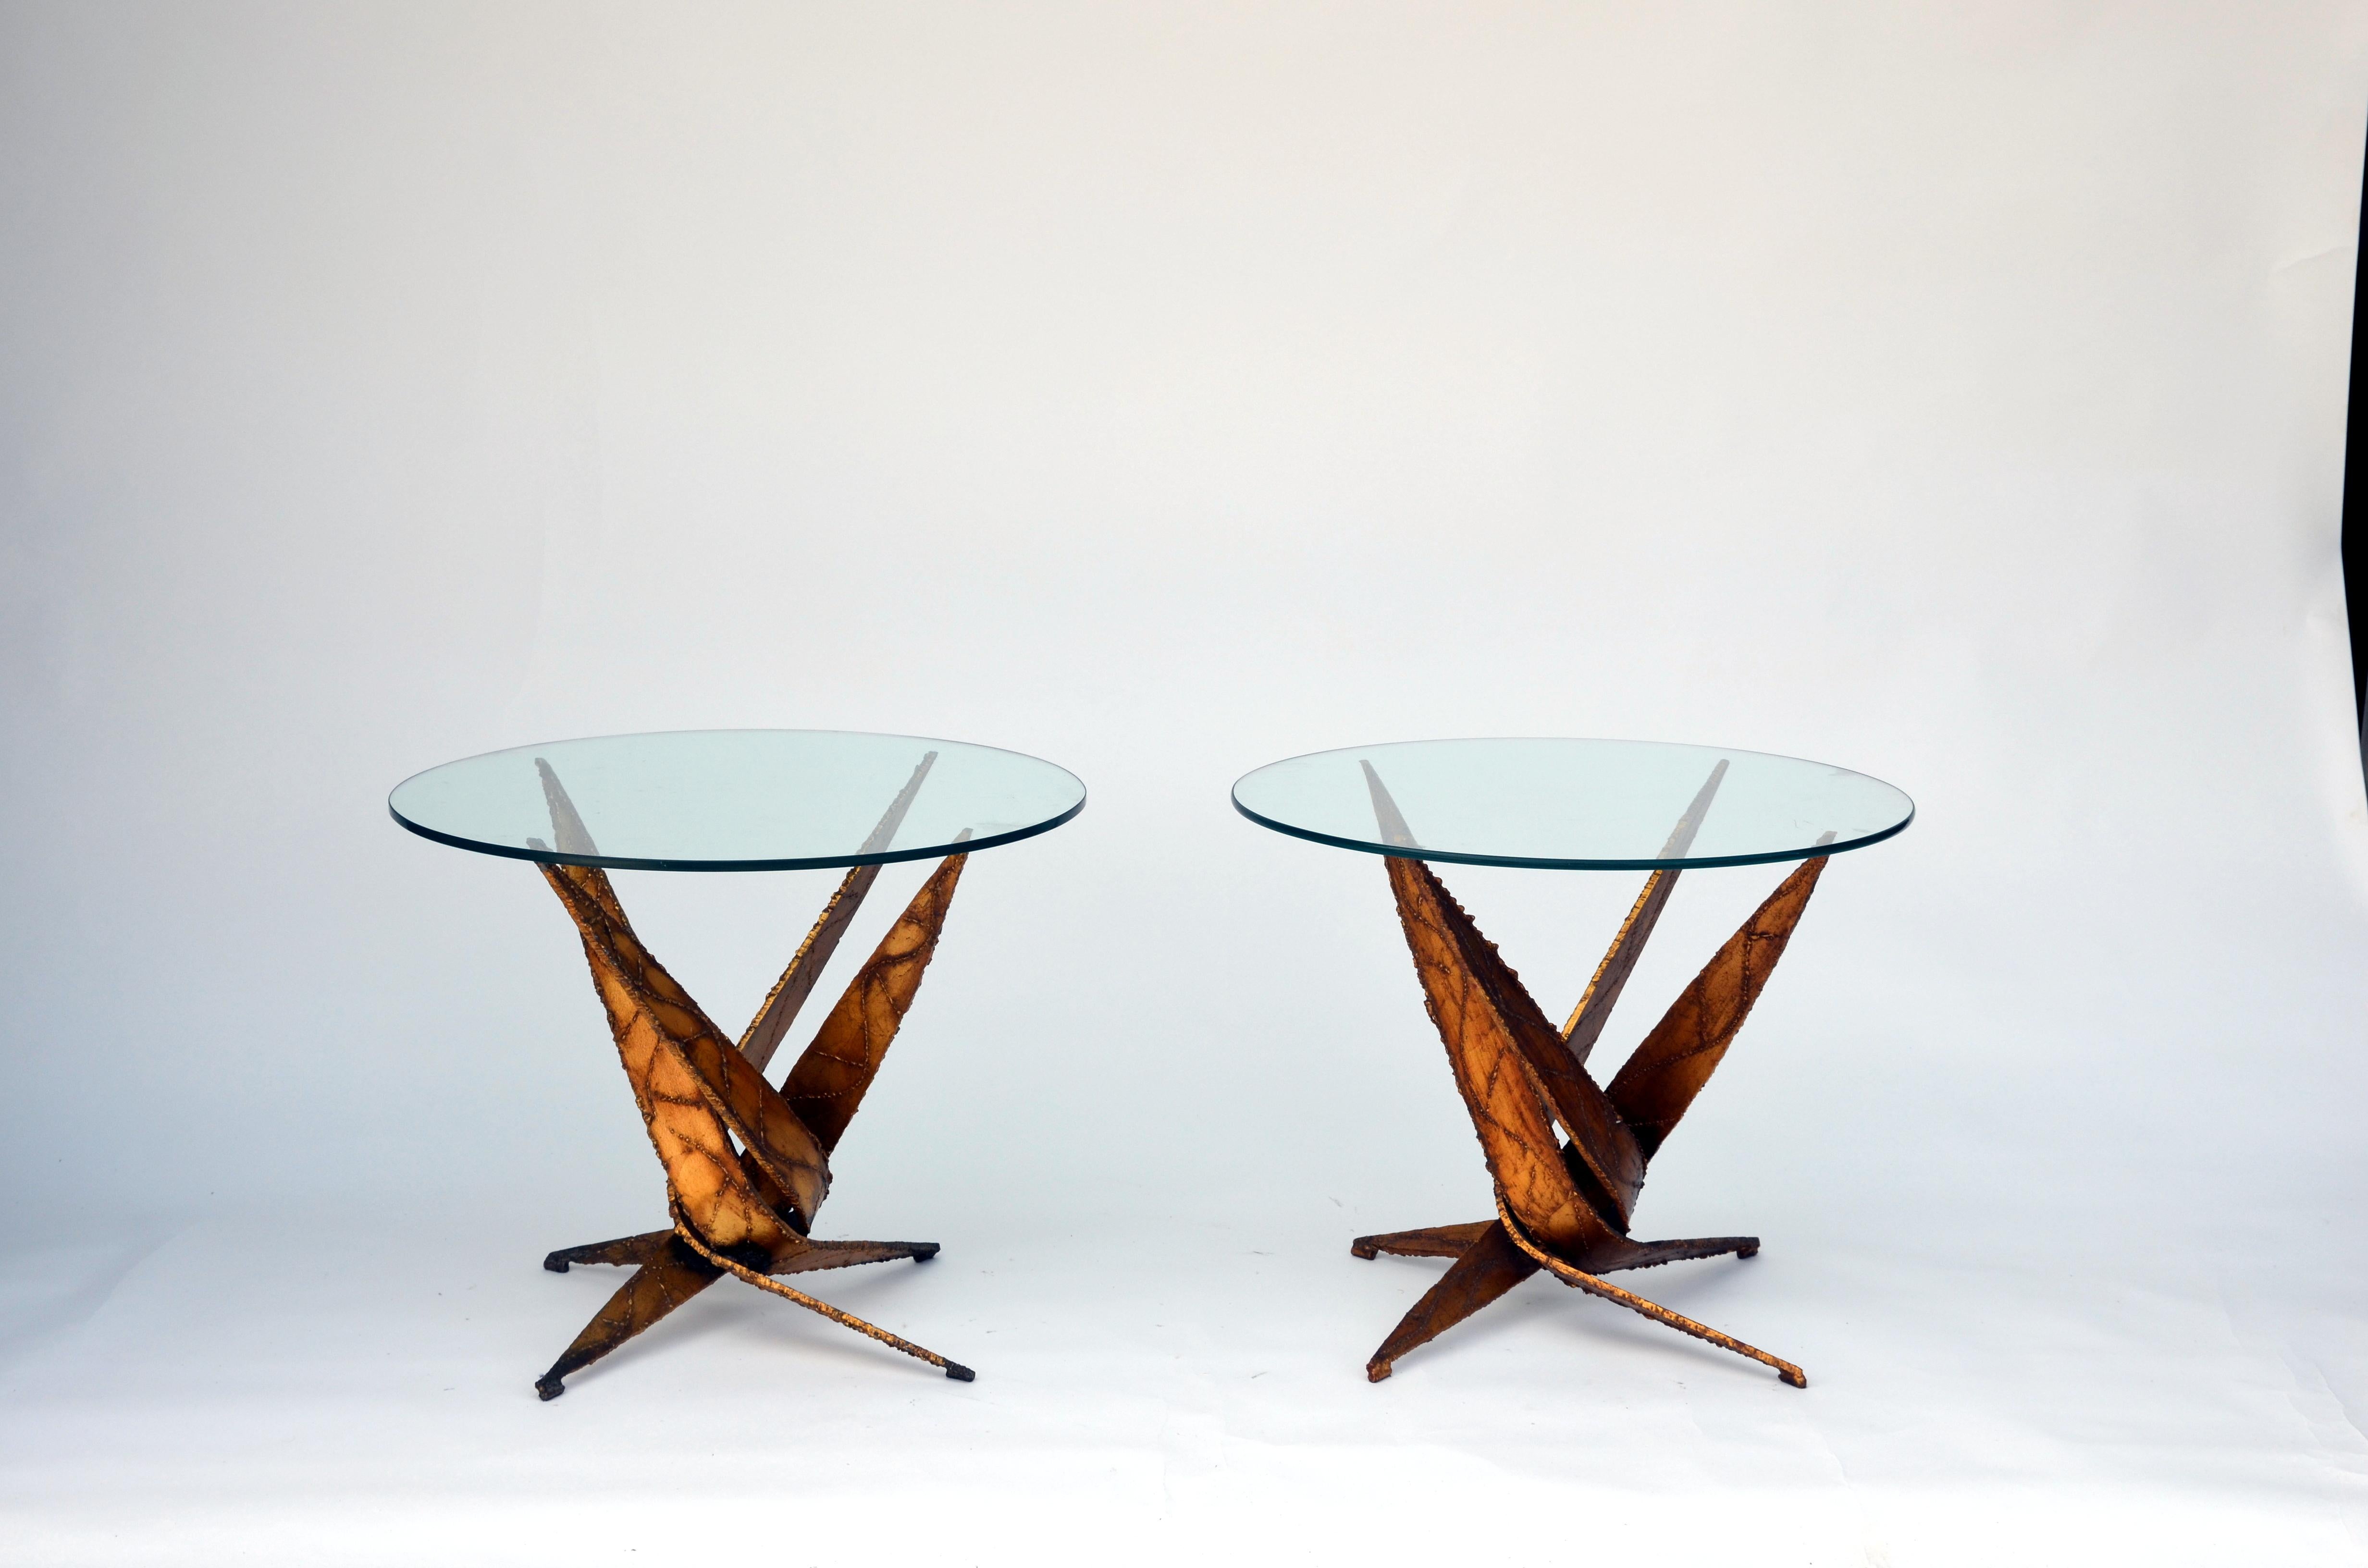 Exceptional pair of brutalist side or end tables by Silas Seandel. Rare as a pair. Torch-cut acid and heat treated steel bases with glass tops.

Silas Seandel was born in New York City, August 11, 1937. He studied sculpture and economics at the